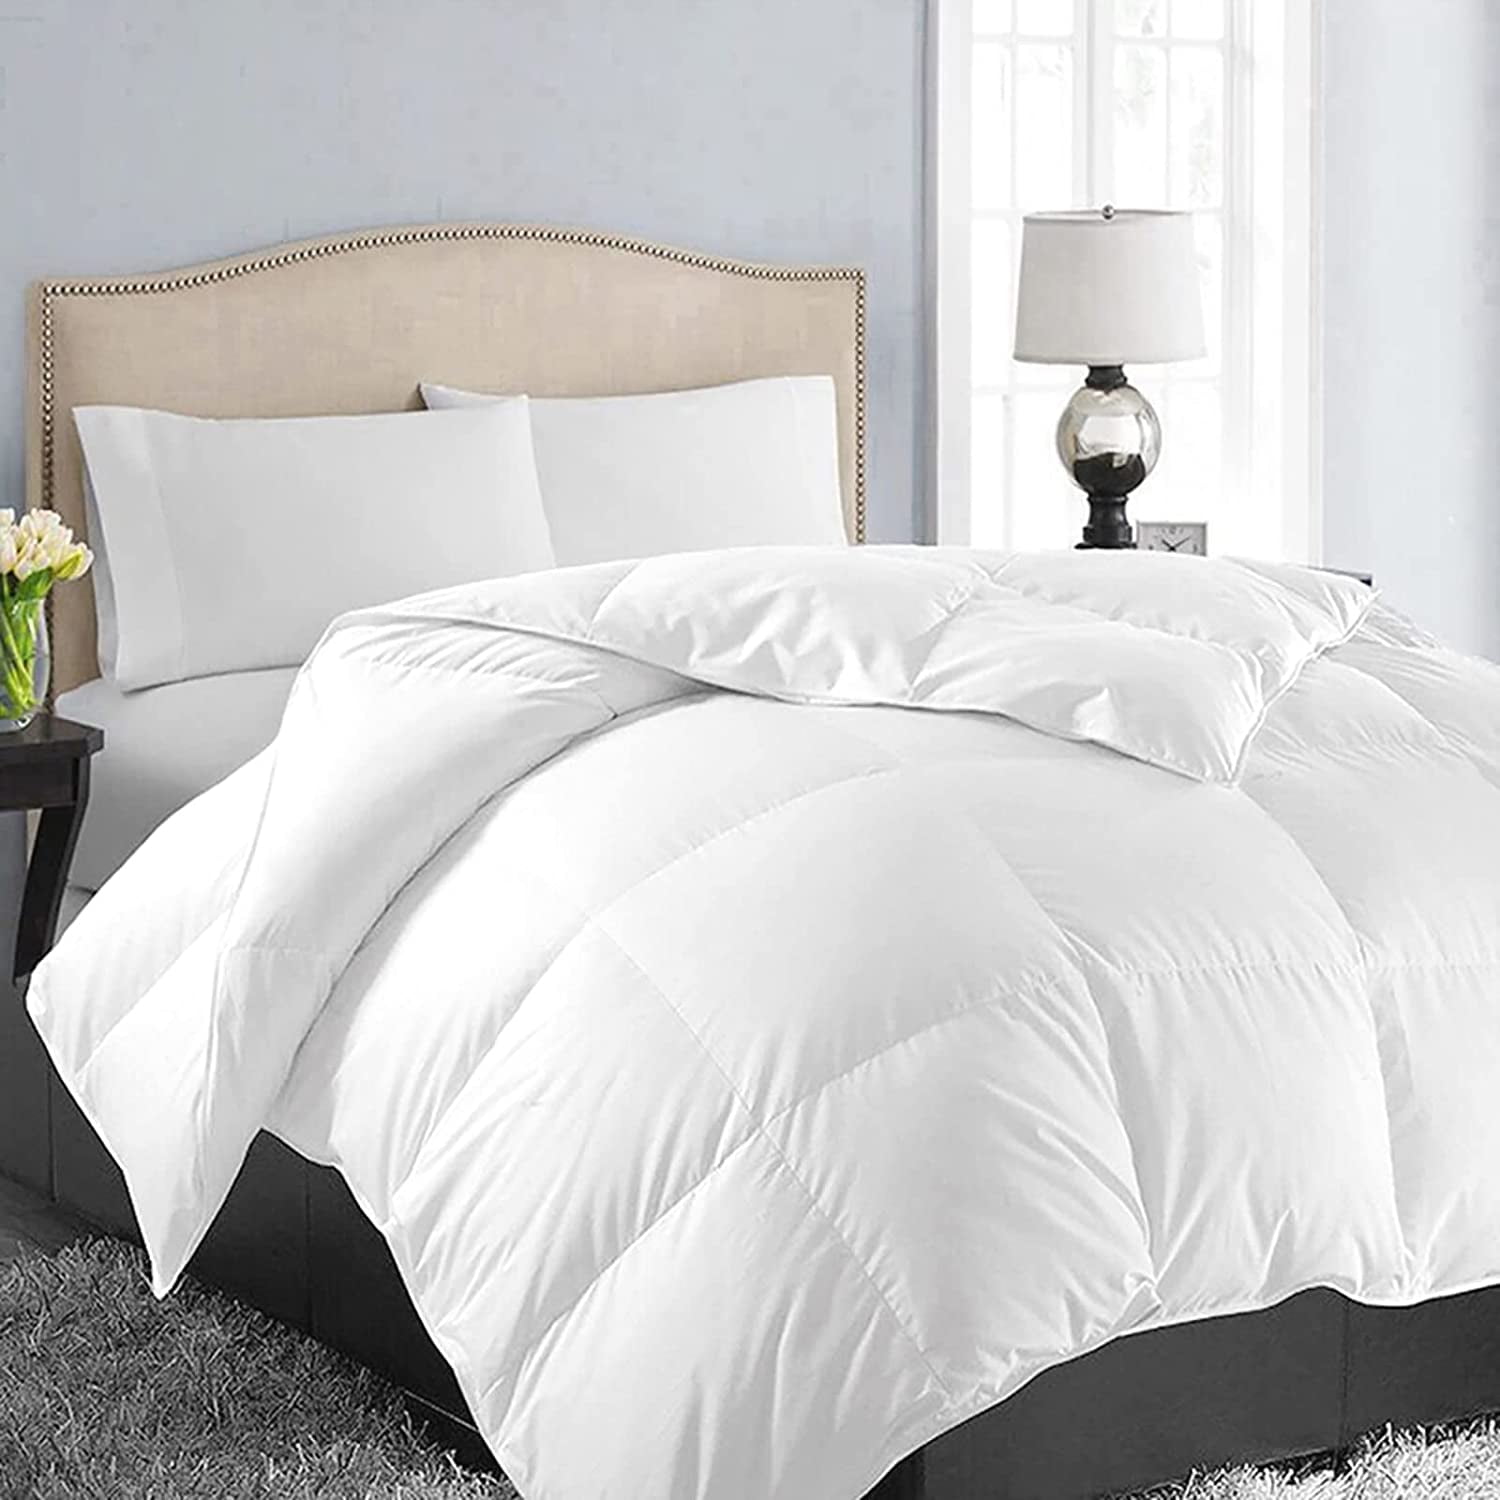 Details about   MOONCAST All Season Comforter Soft Quilted Down Alternative Summer Cooling Duvet 